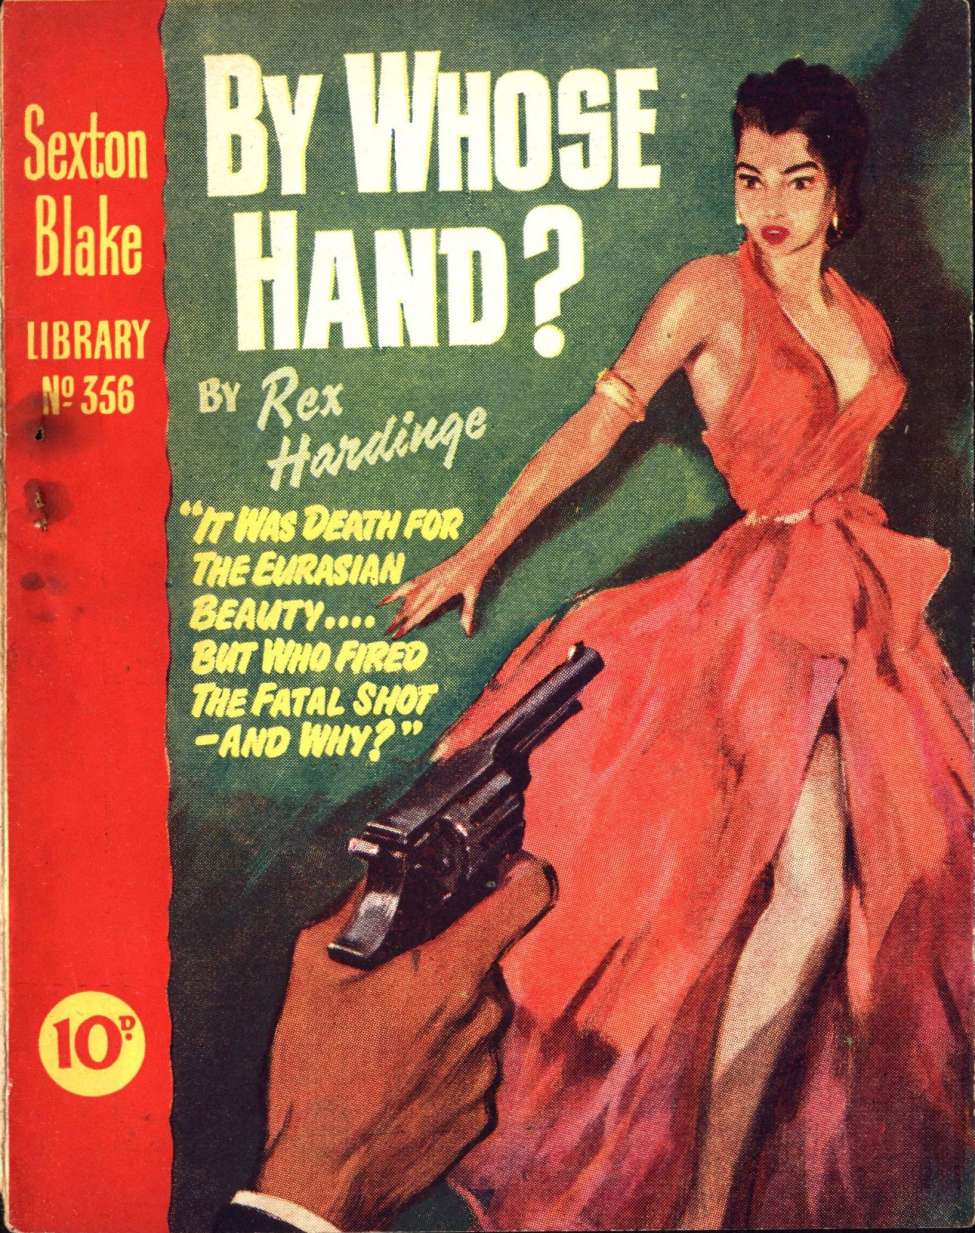 Comic Book Cover For Sexton Blake Library S3 356 - By Whose Hand?